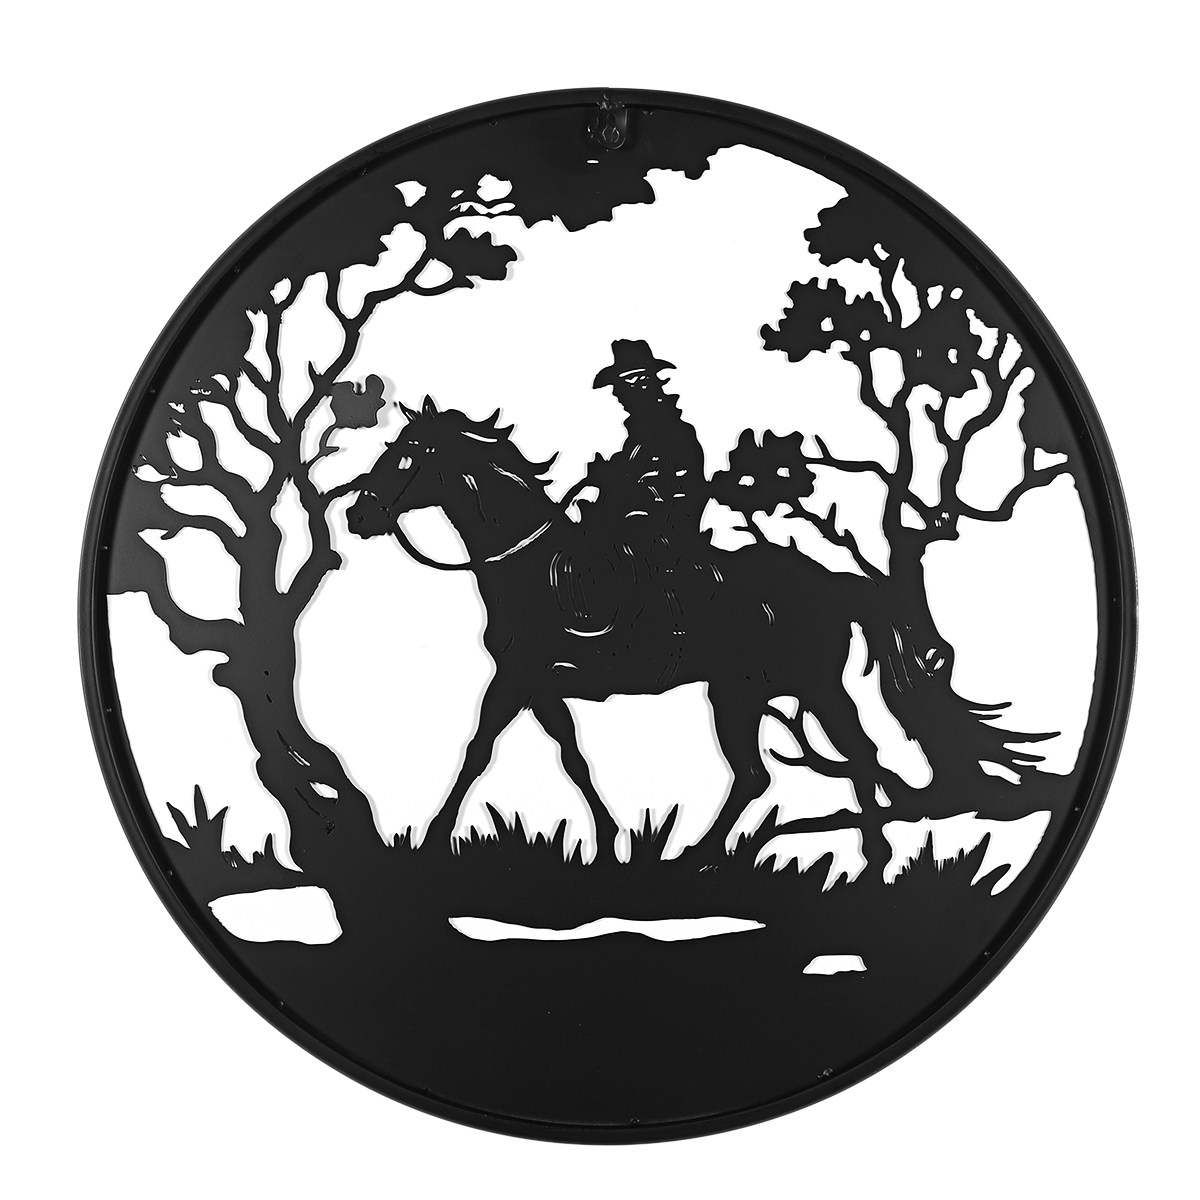 Man-Riding-Horse-In-Forest-Round-Black-Metal-Wall-Hanging-Art-Decoration-Room-1794308-6